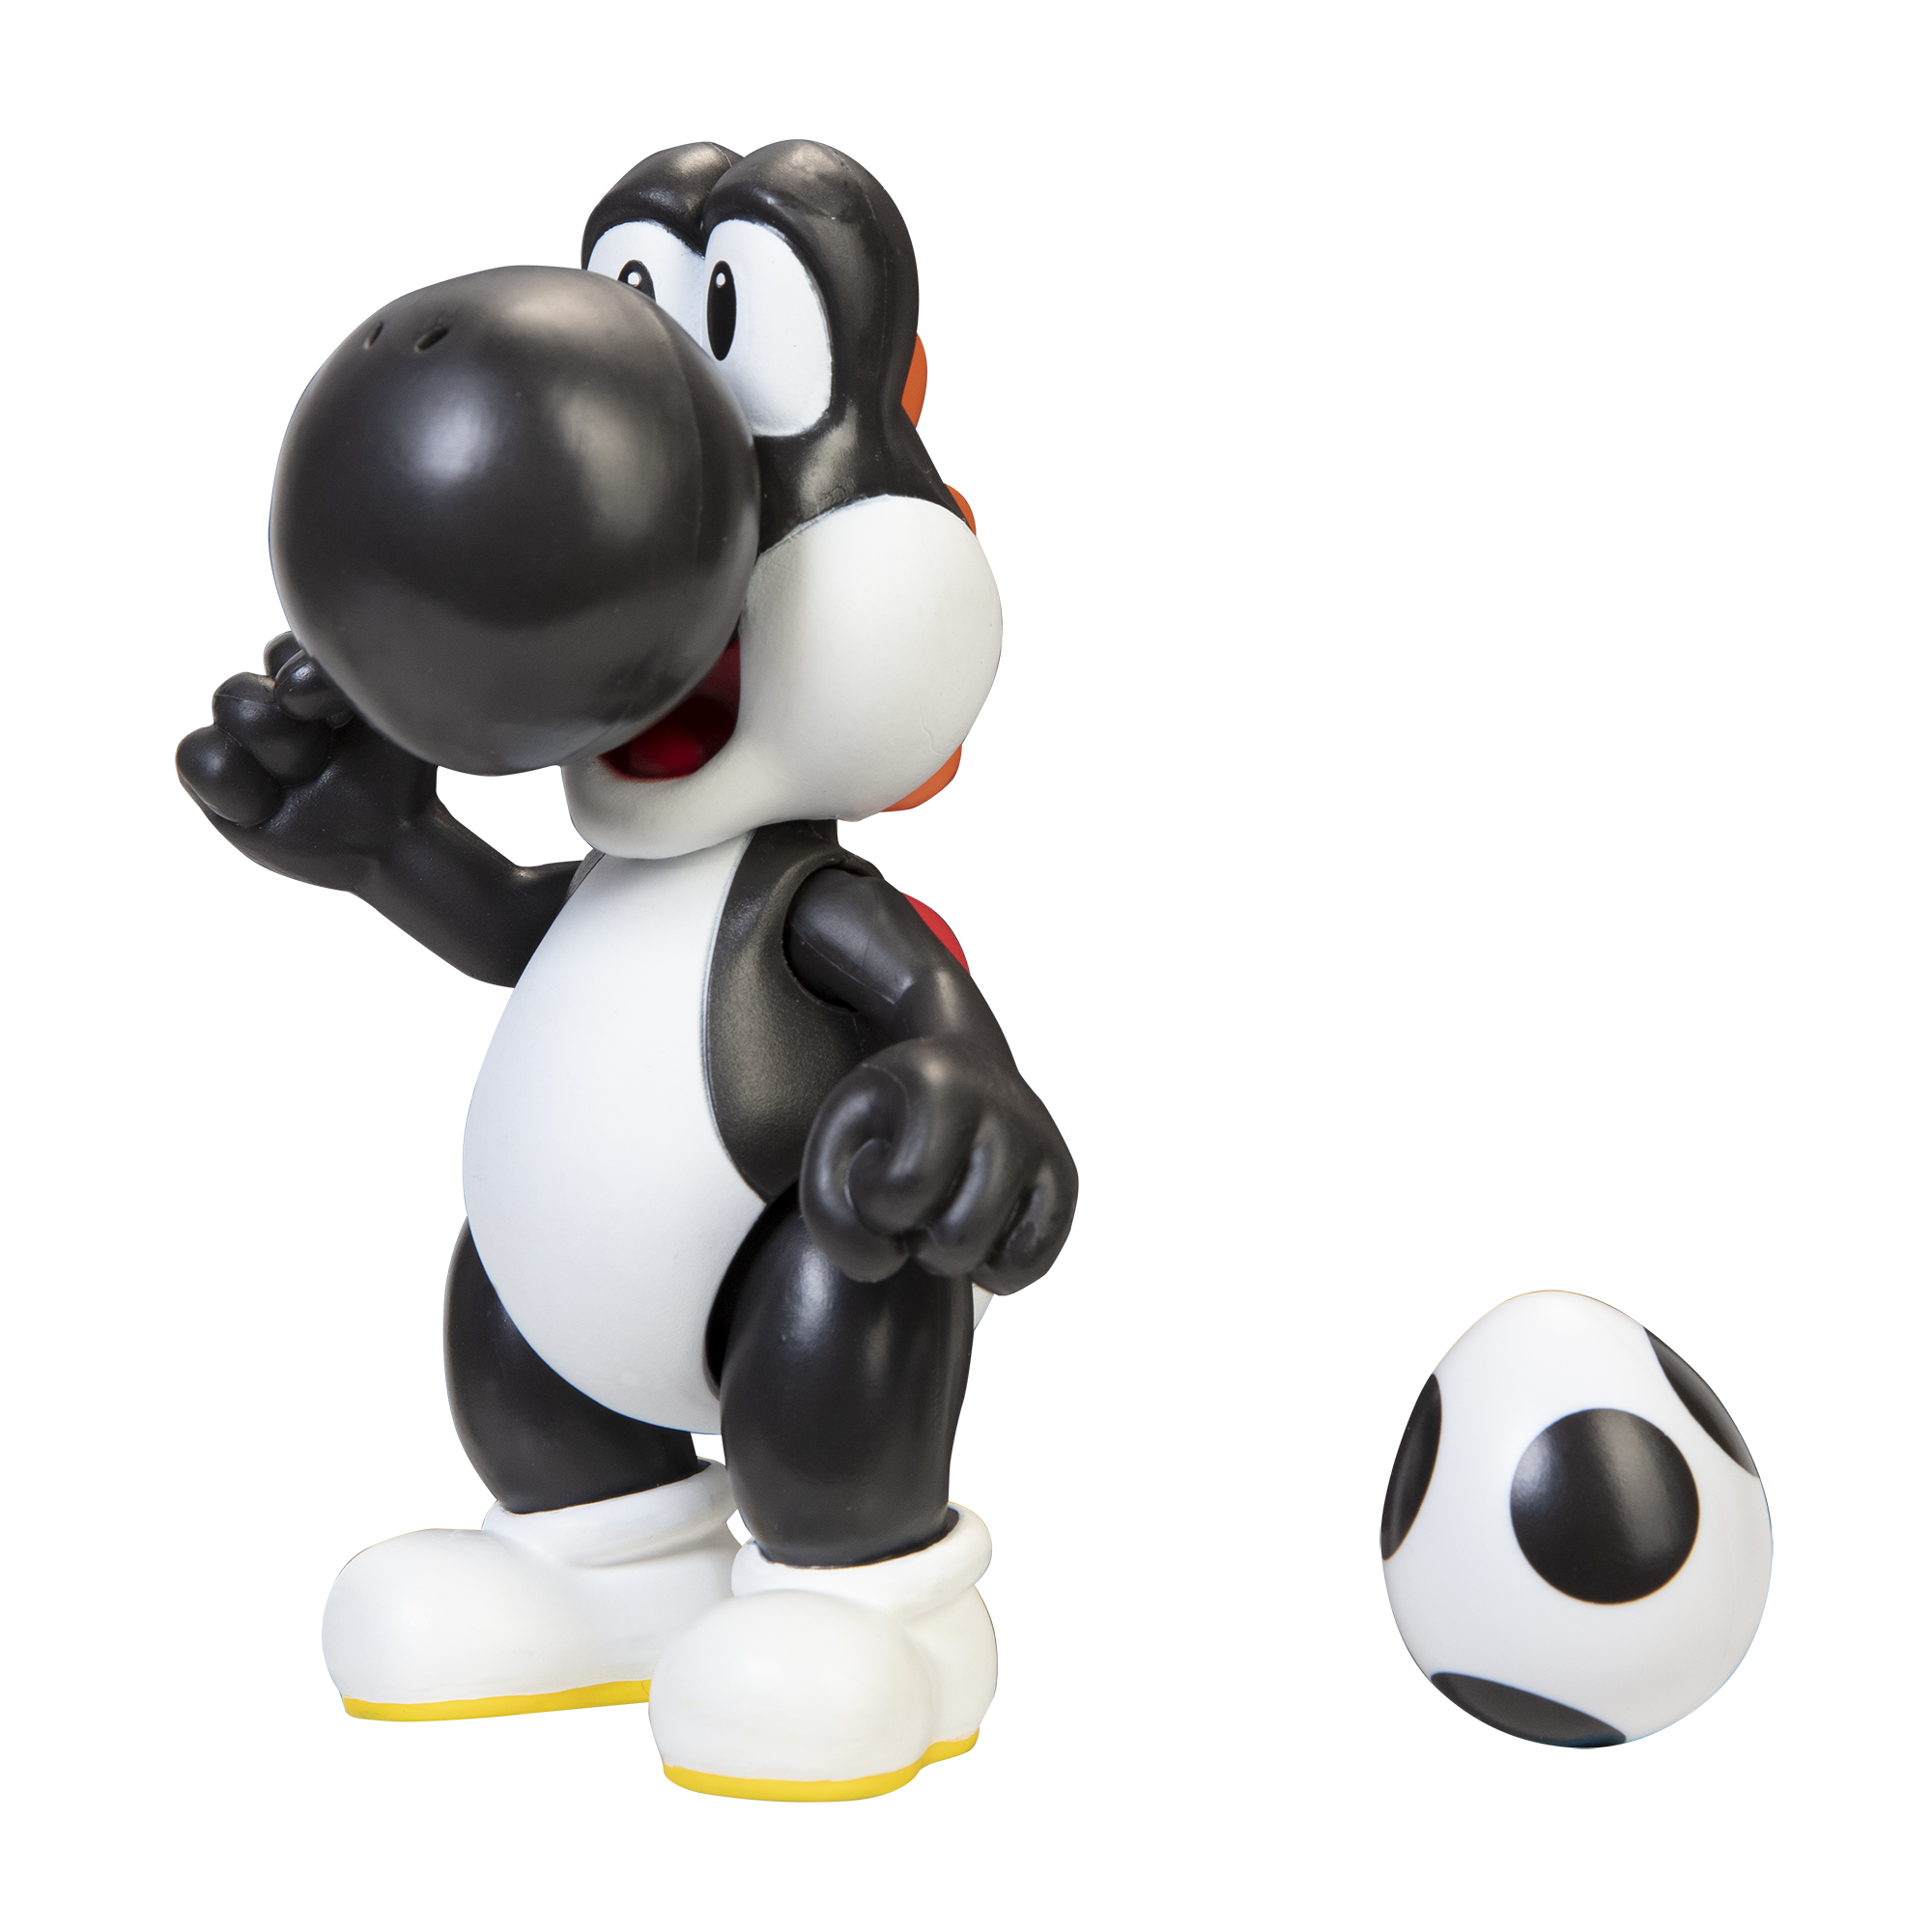 Black Yoshi with Egg 4-inch Articulated Figure - JAKKS Pacific, Inc.